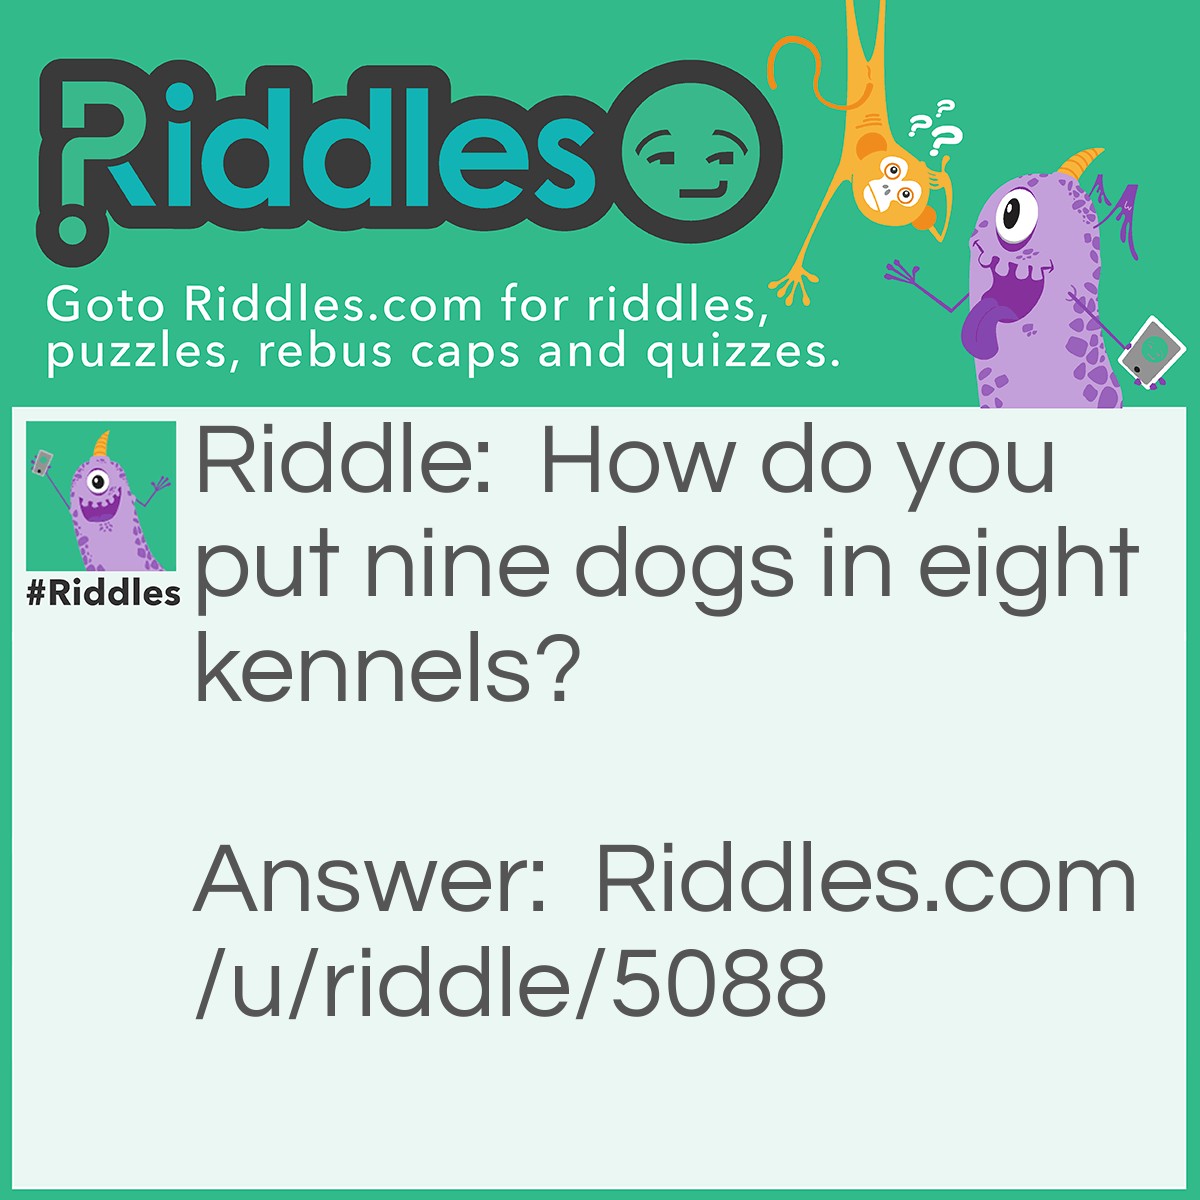 Riddle: How do you put nine dogs in eight kennels? Answer: Eight kennels. "N", "I", "N", "E", "D", "O", "G", "S"